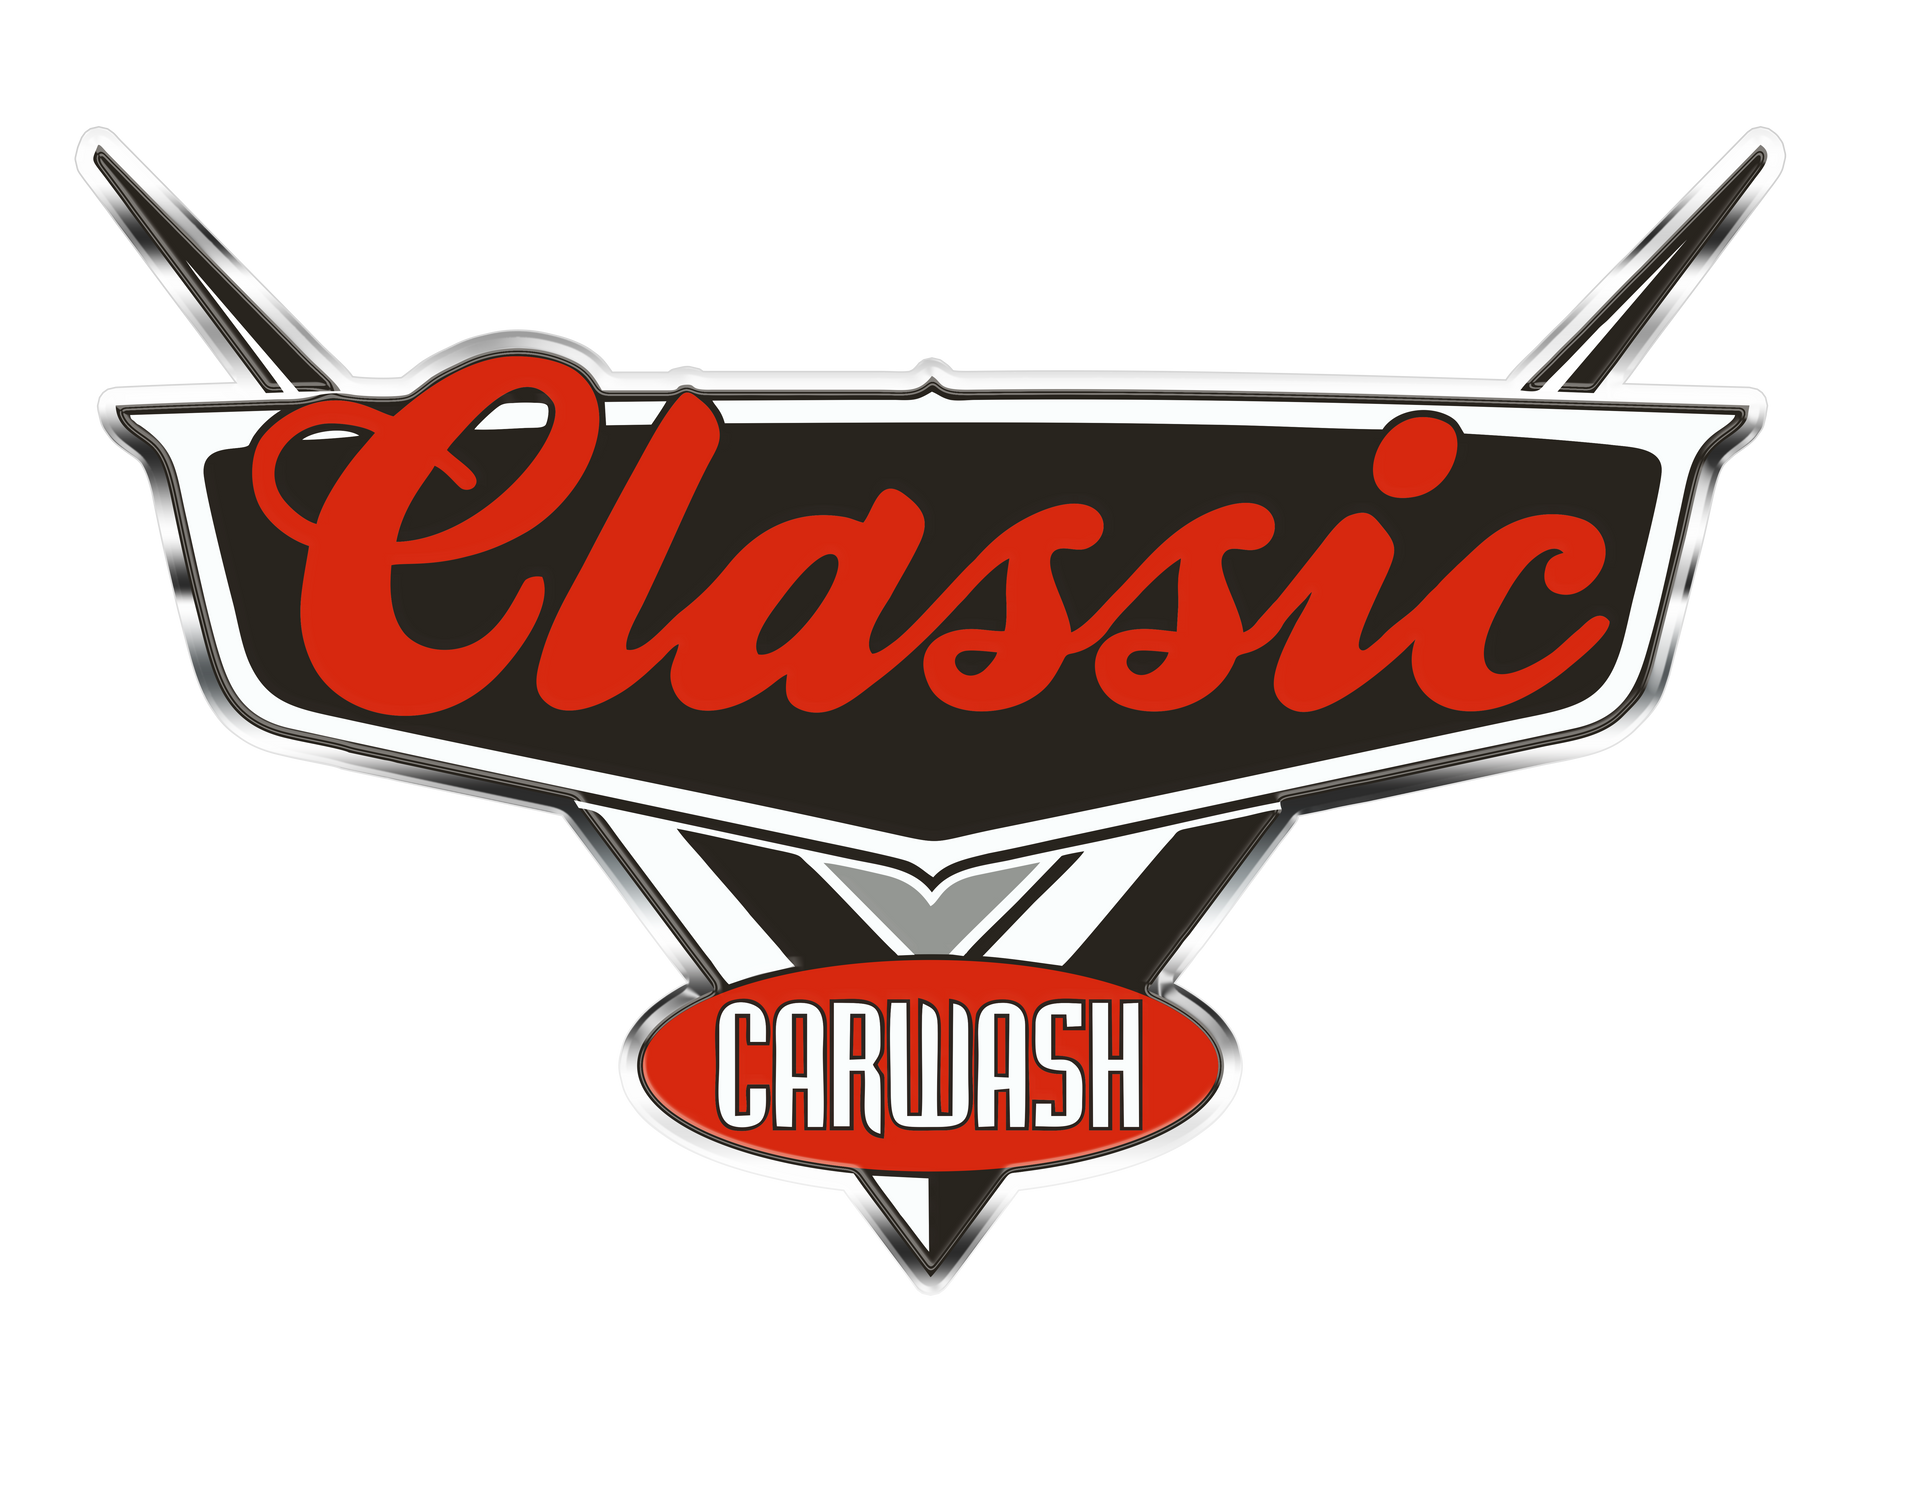 A logo that looks like the emblem on a the hood of a car that says Classic Carwash